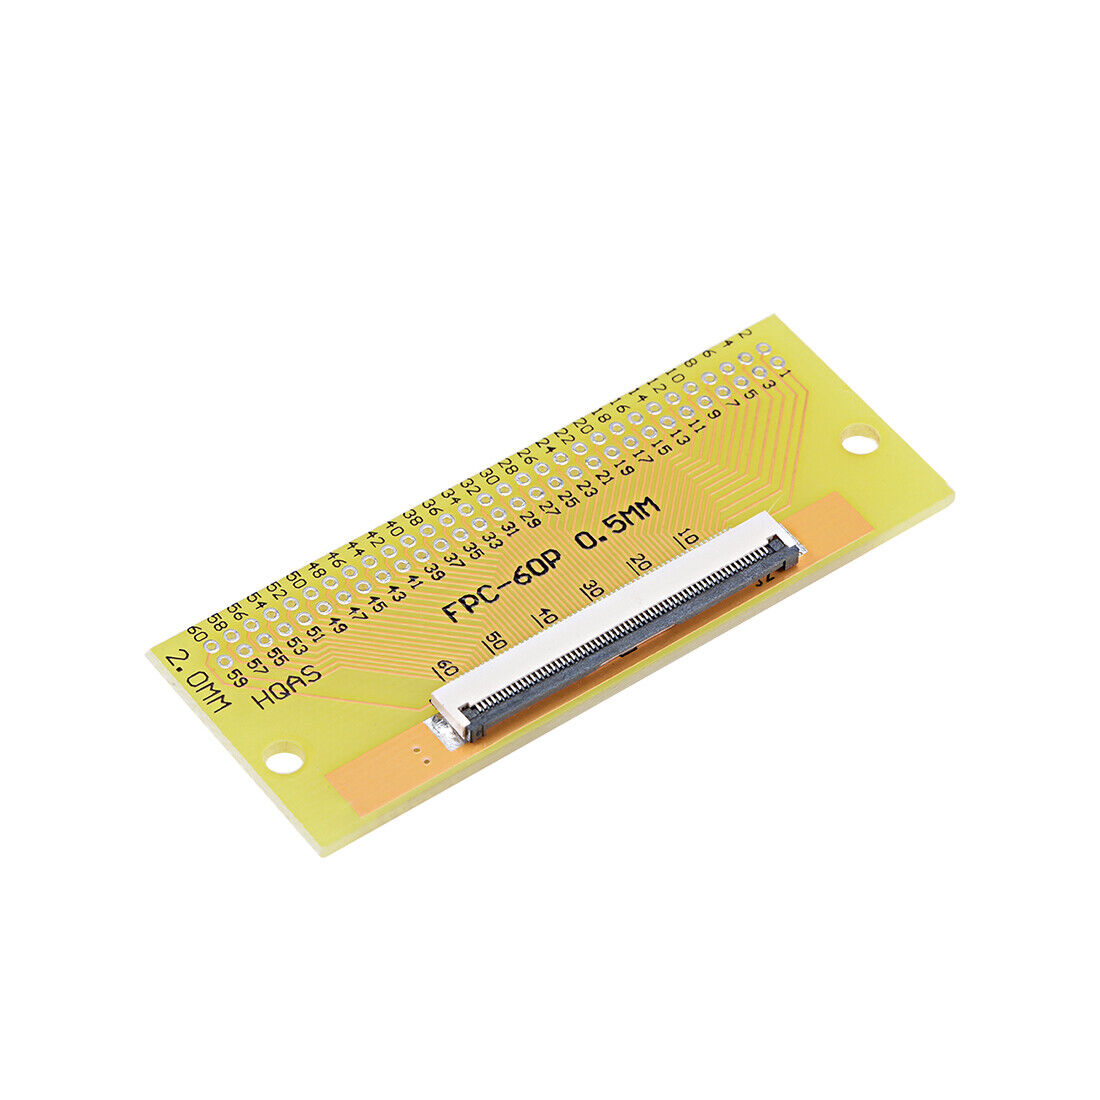 FFC FPC 60Pin 0.5mm Pitch to DIP 2.0mm PCB Converter Board Couple Extend Adapter